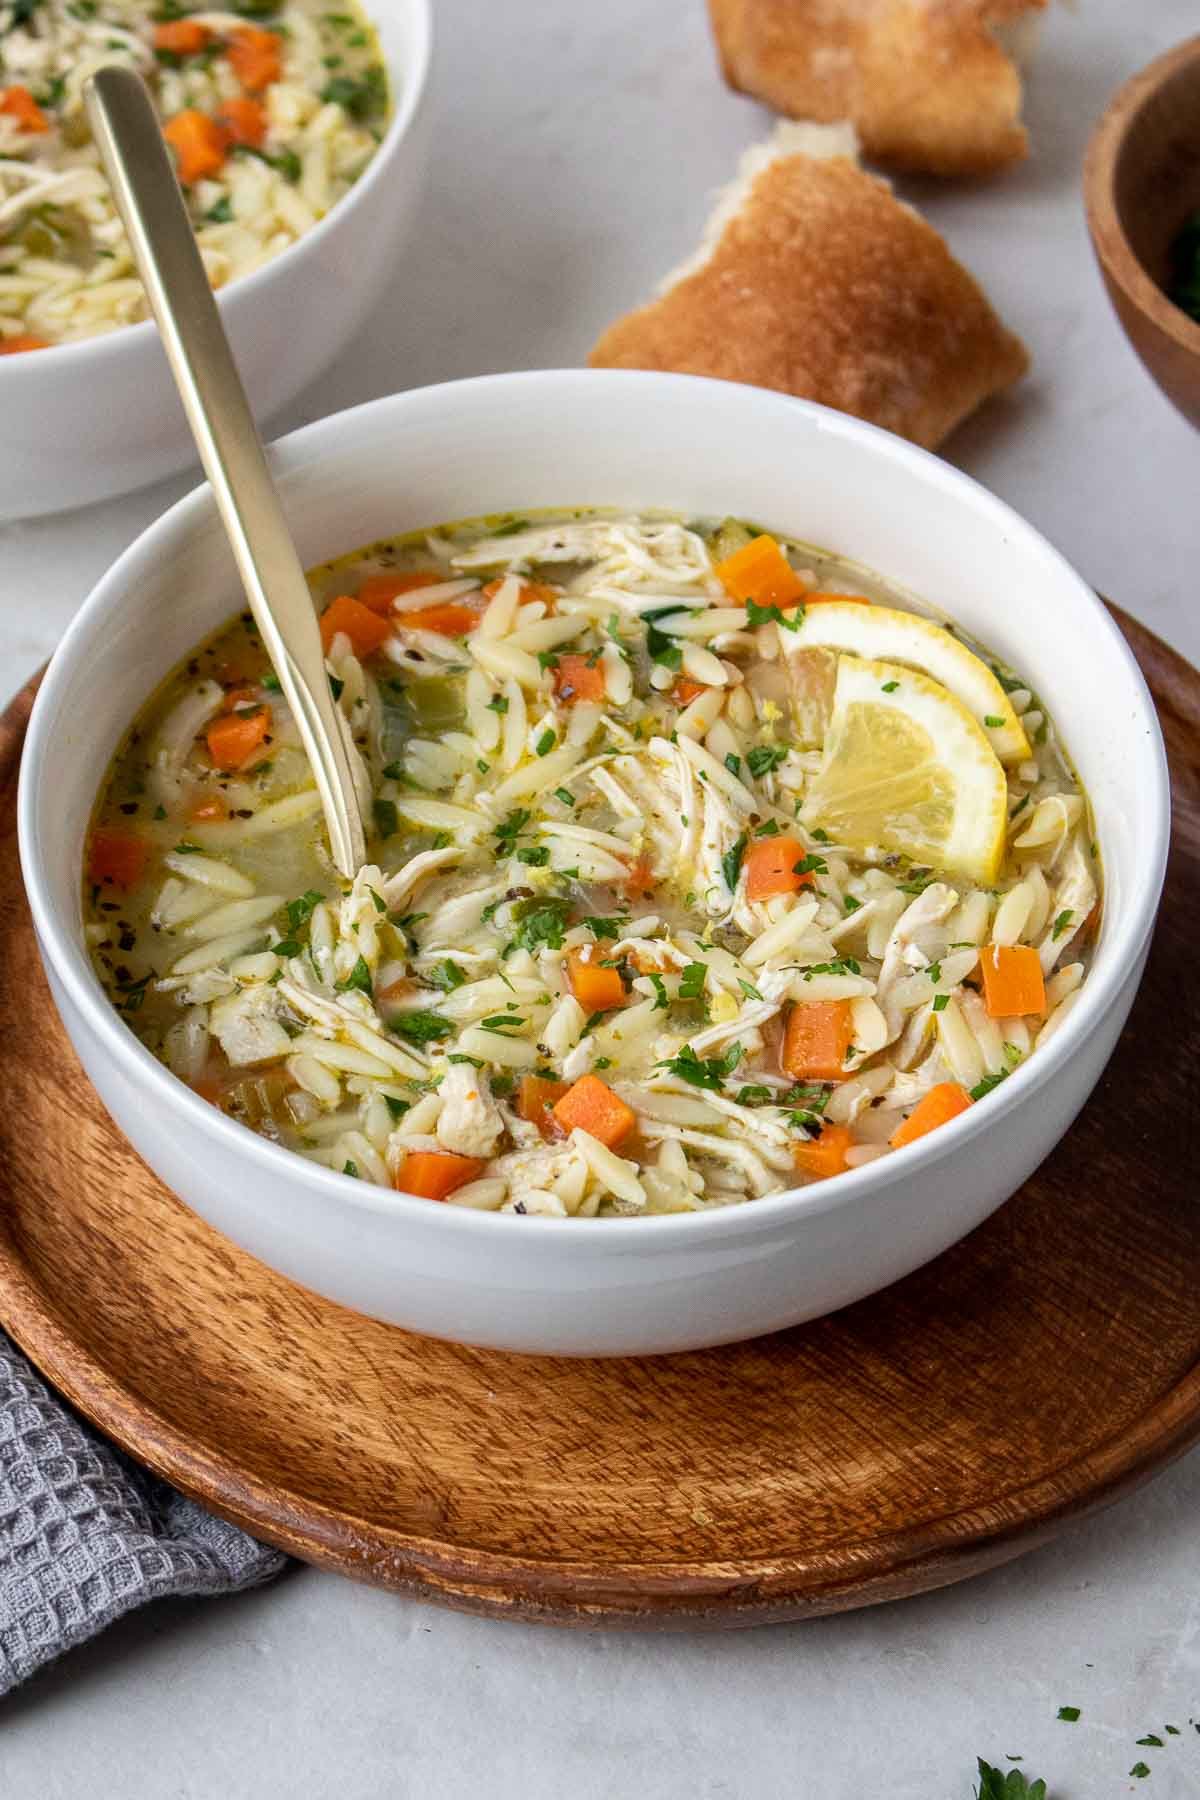 Chicken lemon orzo soup in a white bowl with a spoon, topped with lemon slices, and a side of crusty bread